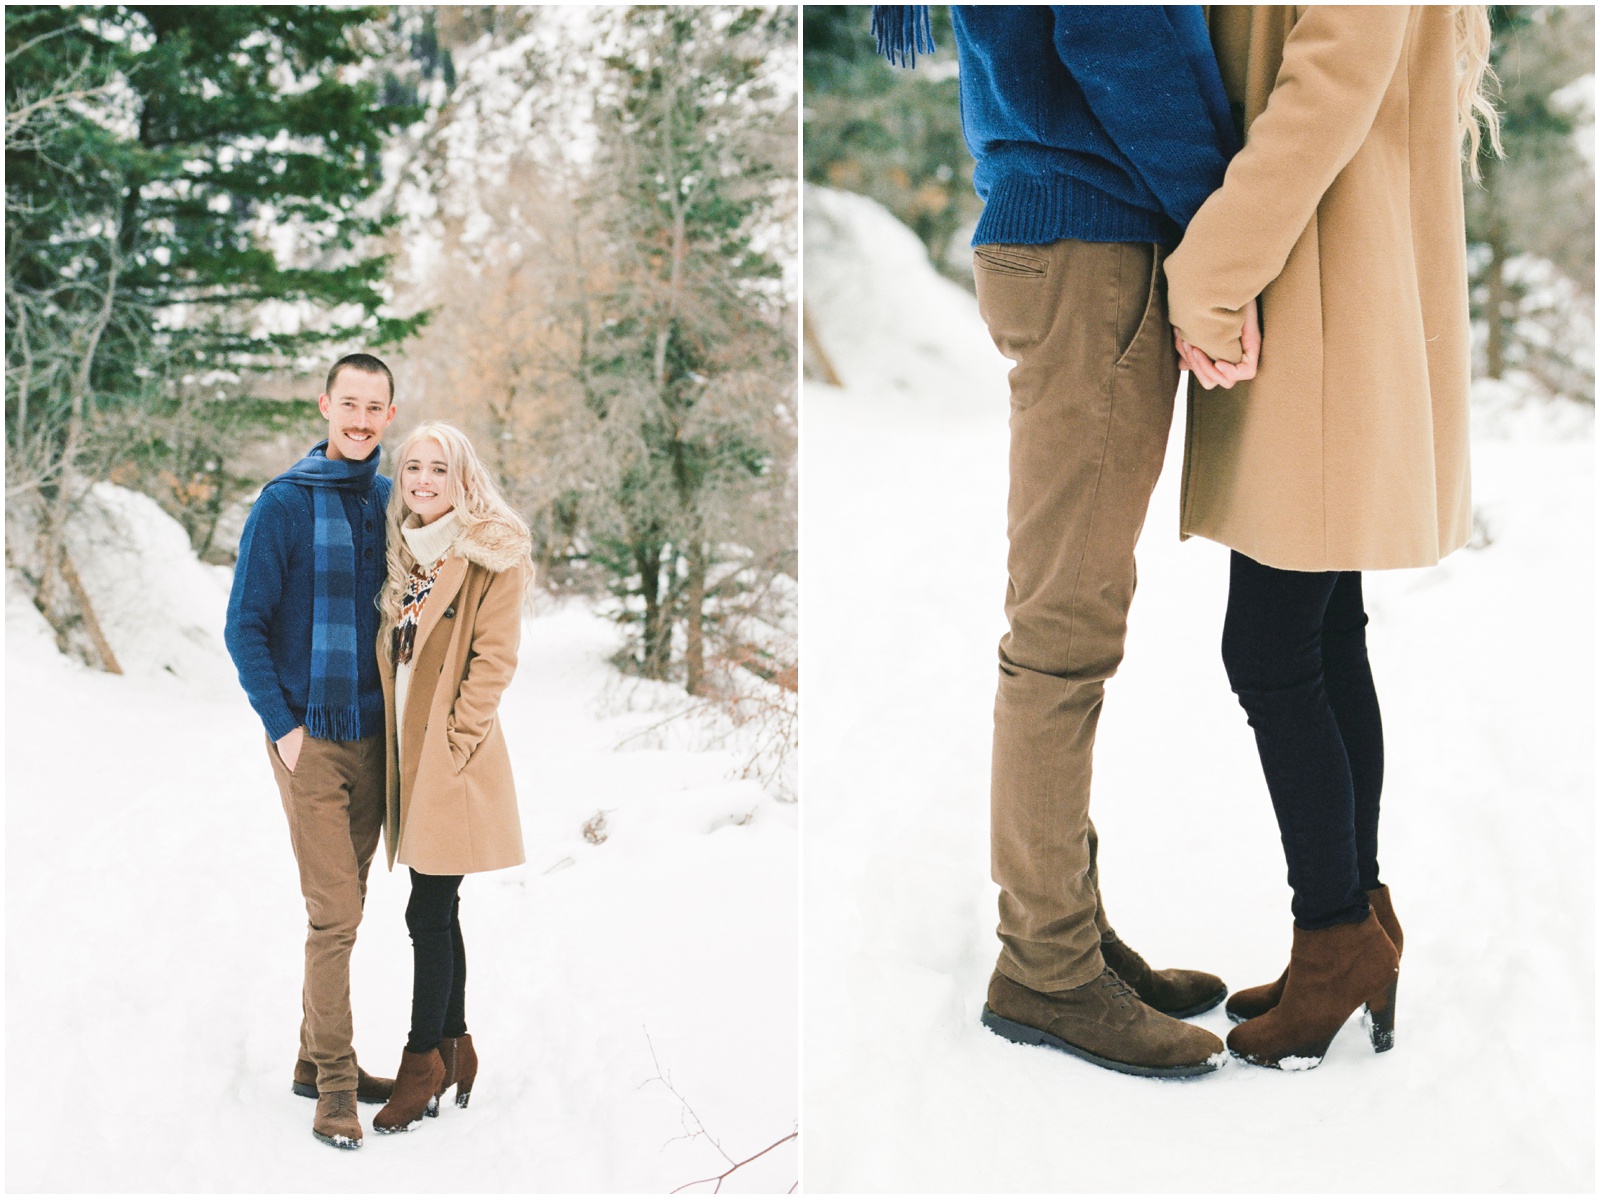 adorable winter engagement photos in the snow